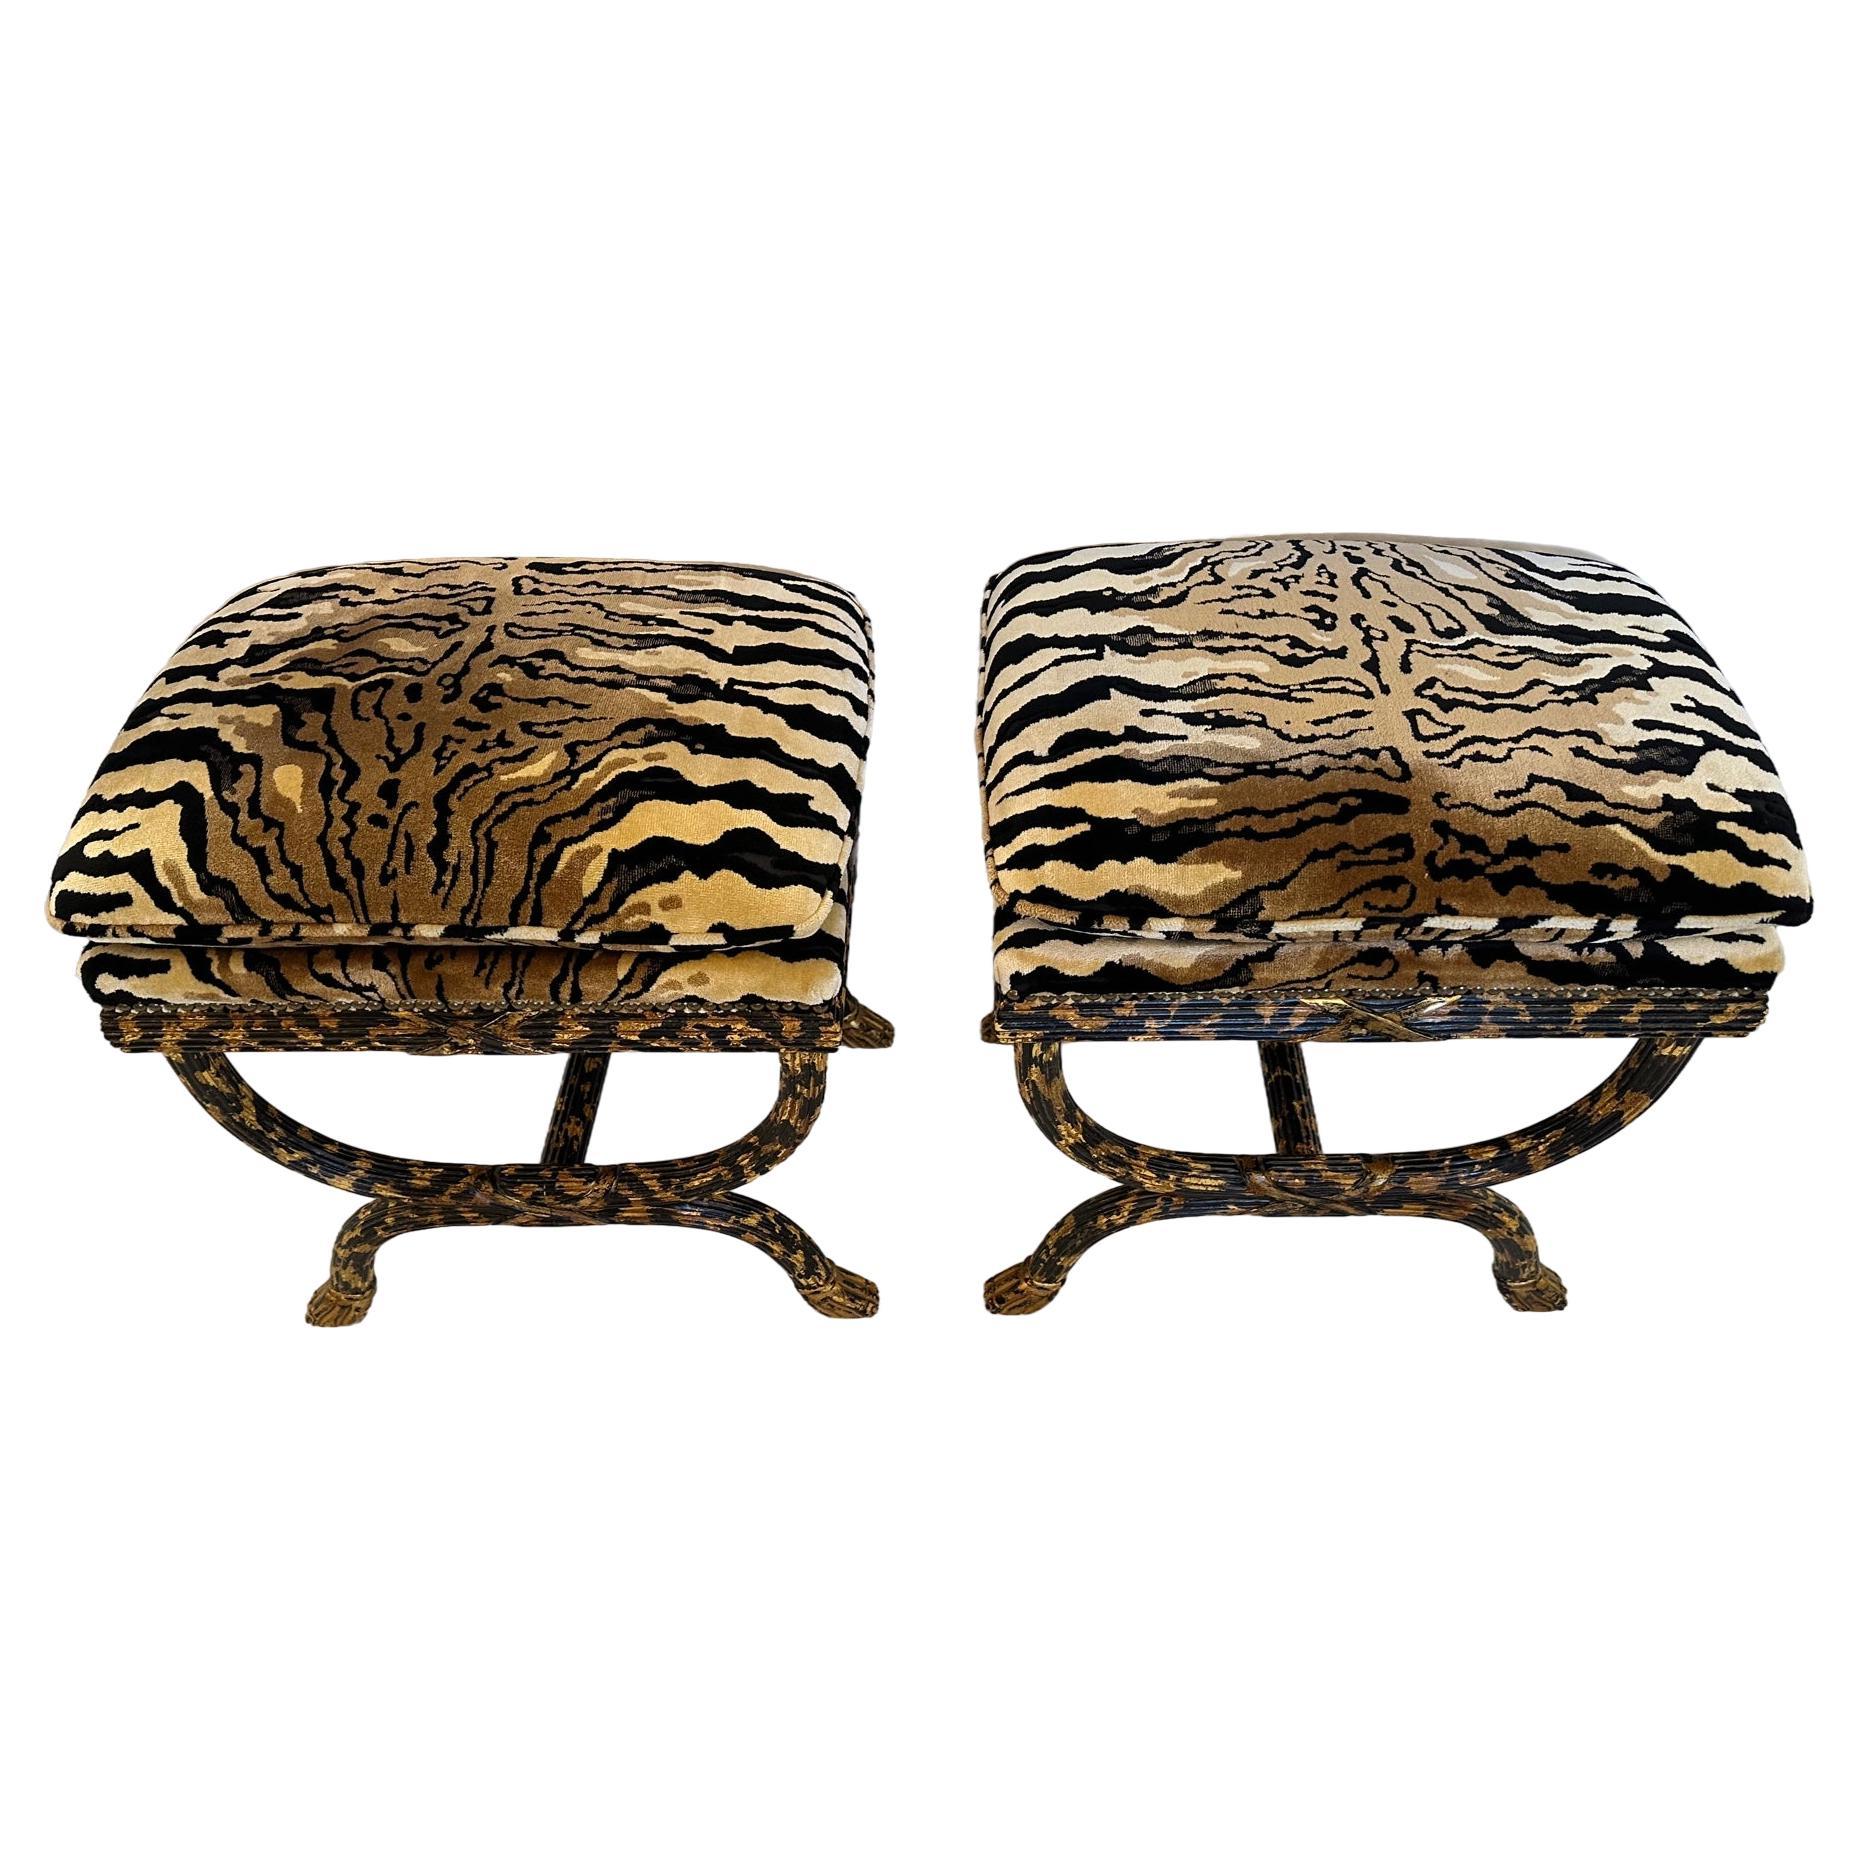 Stunning pair of custom, neoclassical style ottomans by William Switzer, renowned  furniture make since 1952.  Glam animal print velvet with hand painted gilding and black fluted wood base, antique nailheads and hoof feet. A rare find